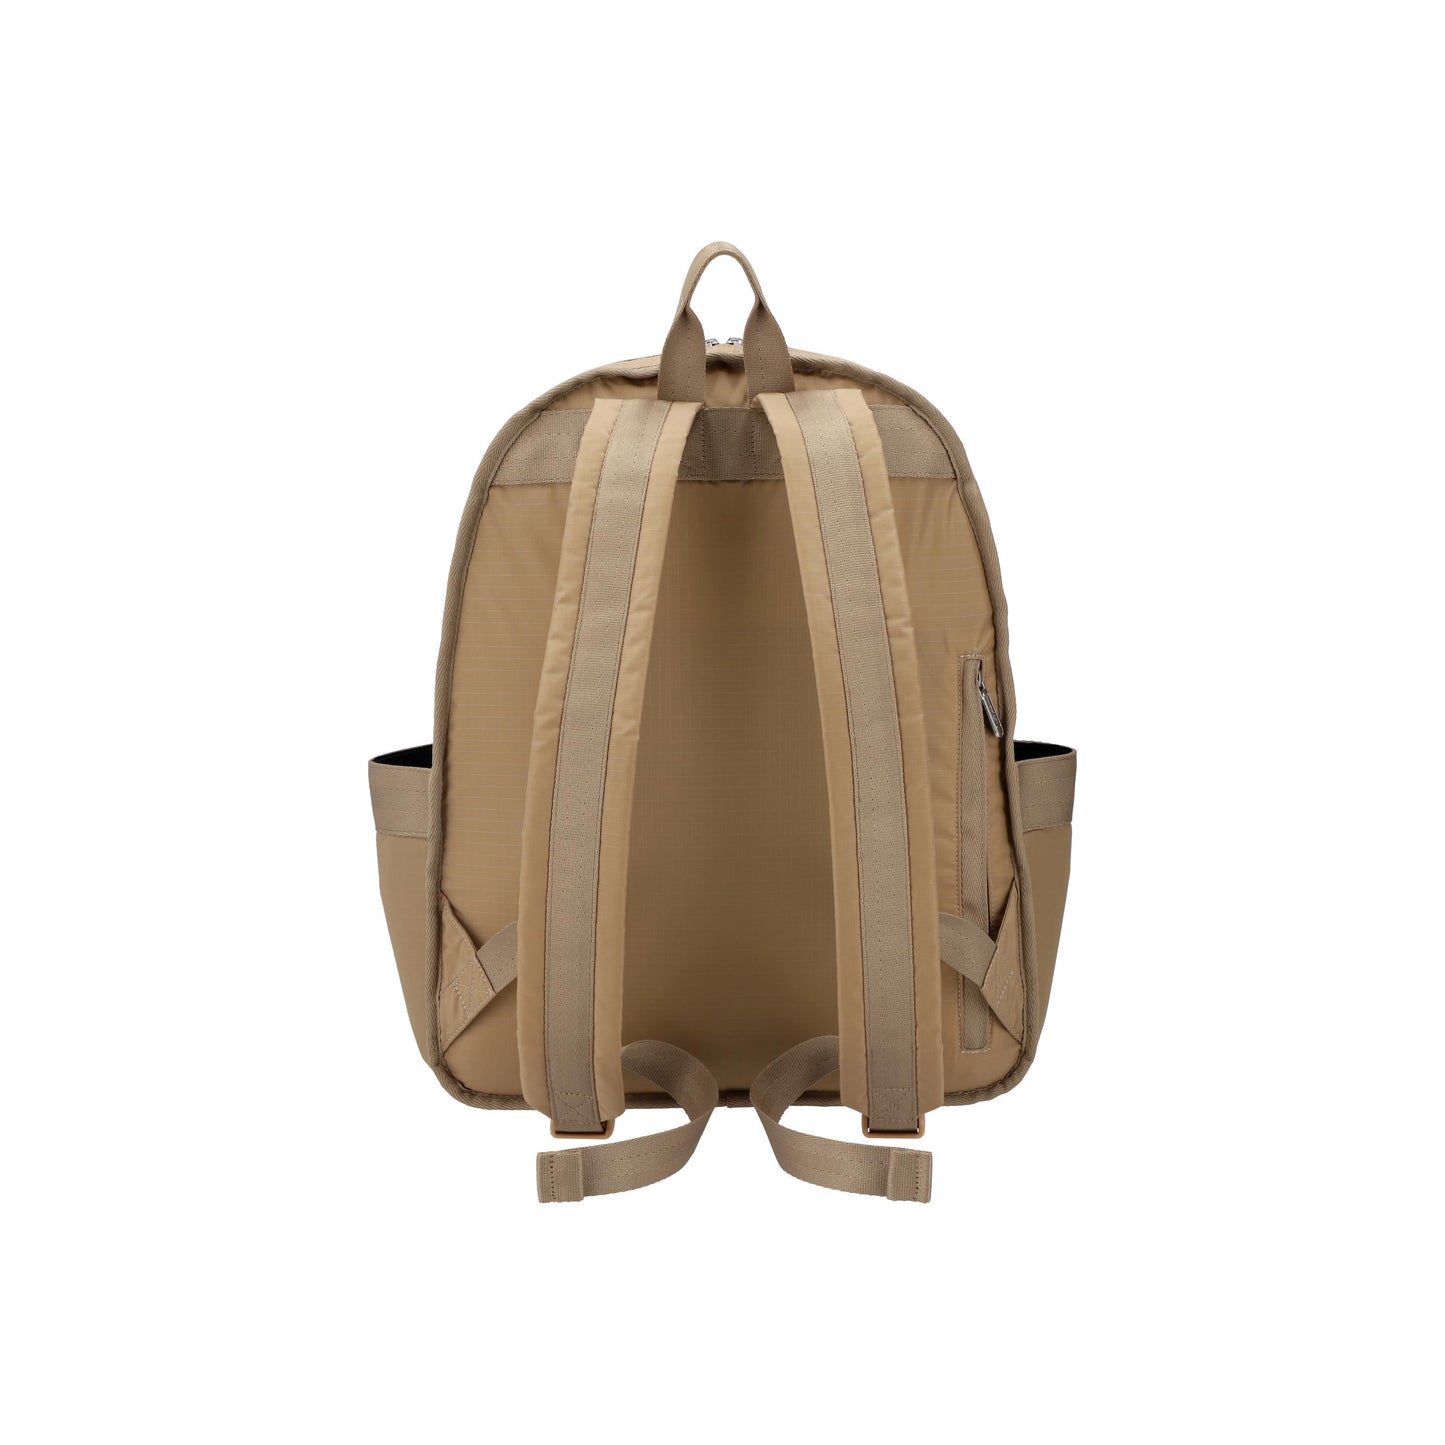 Provincial Route Backpack